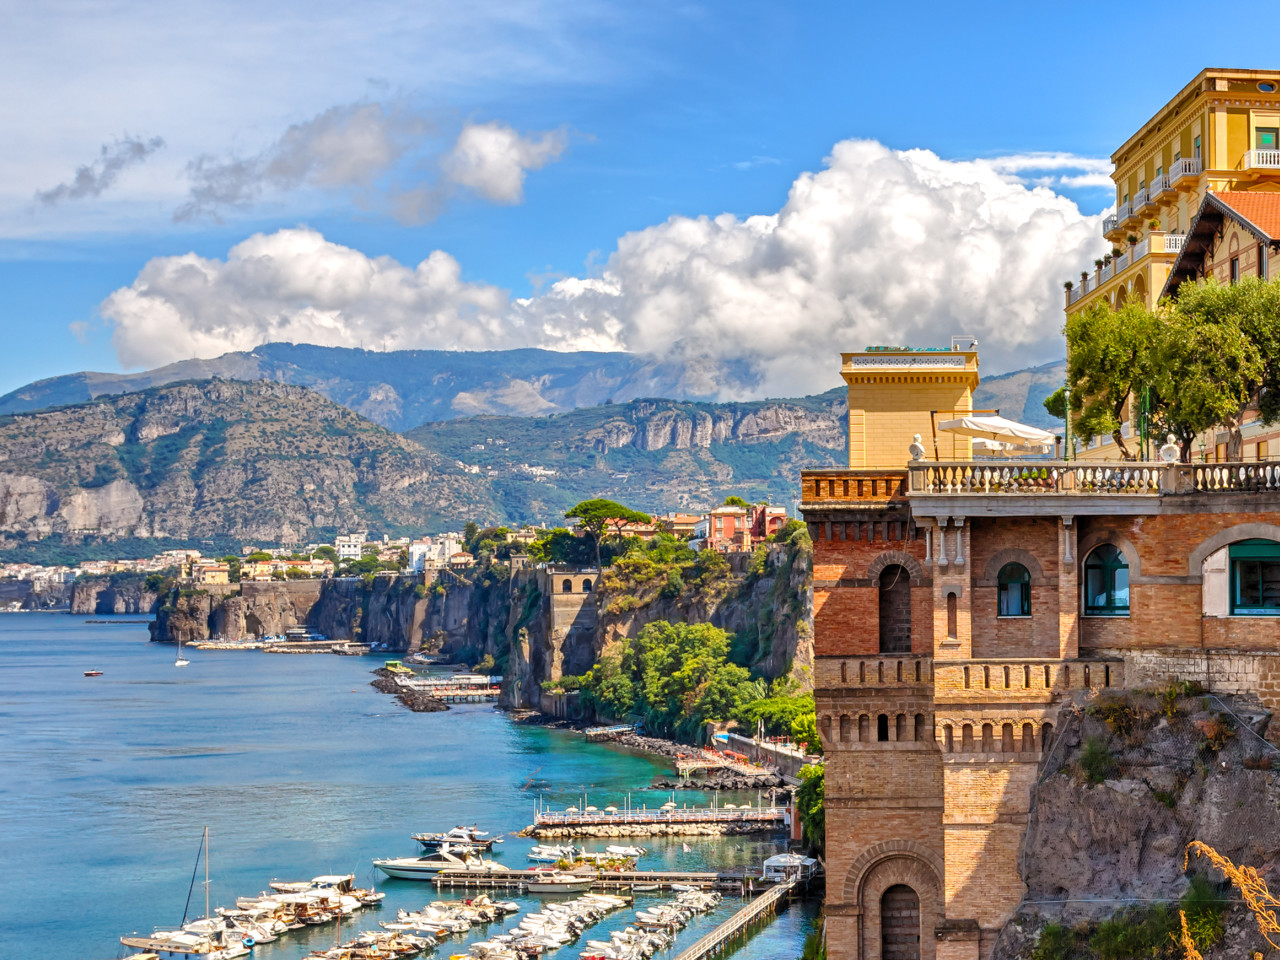 Flavours of Sorrento - Food and walking tour